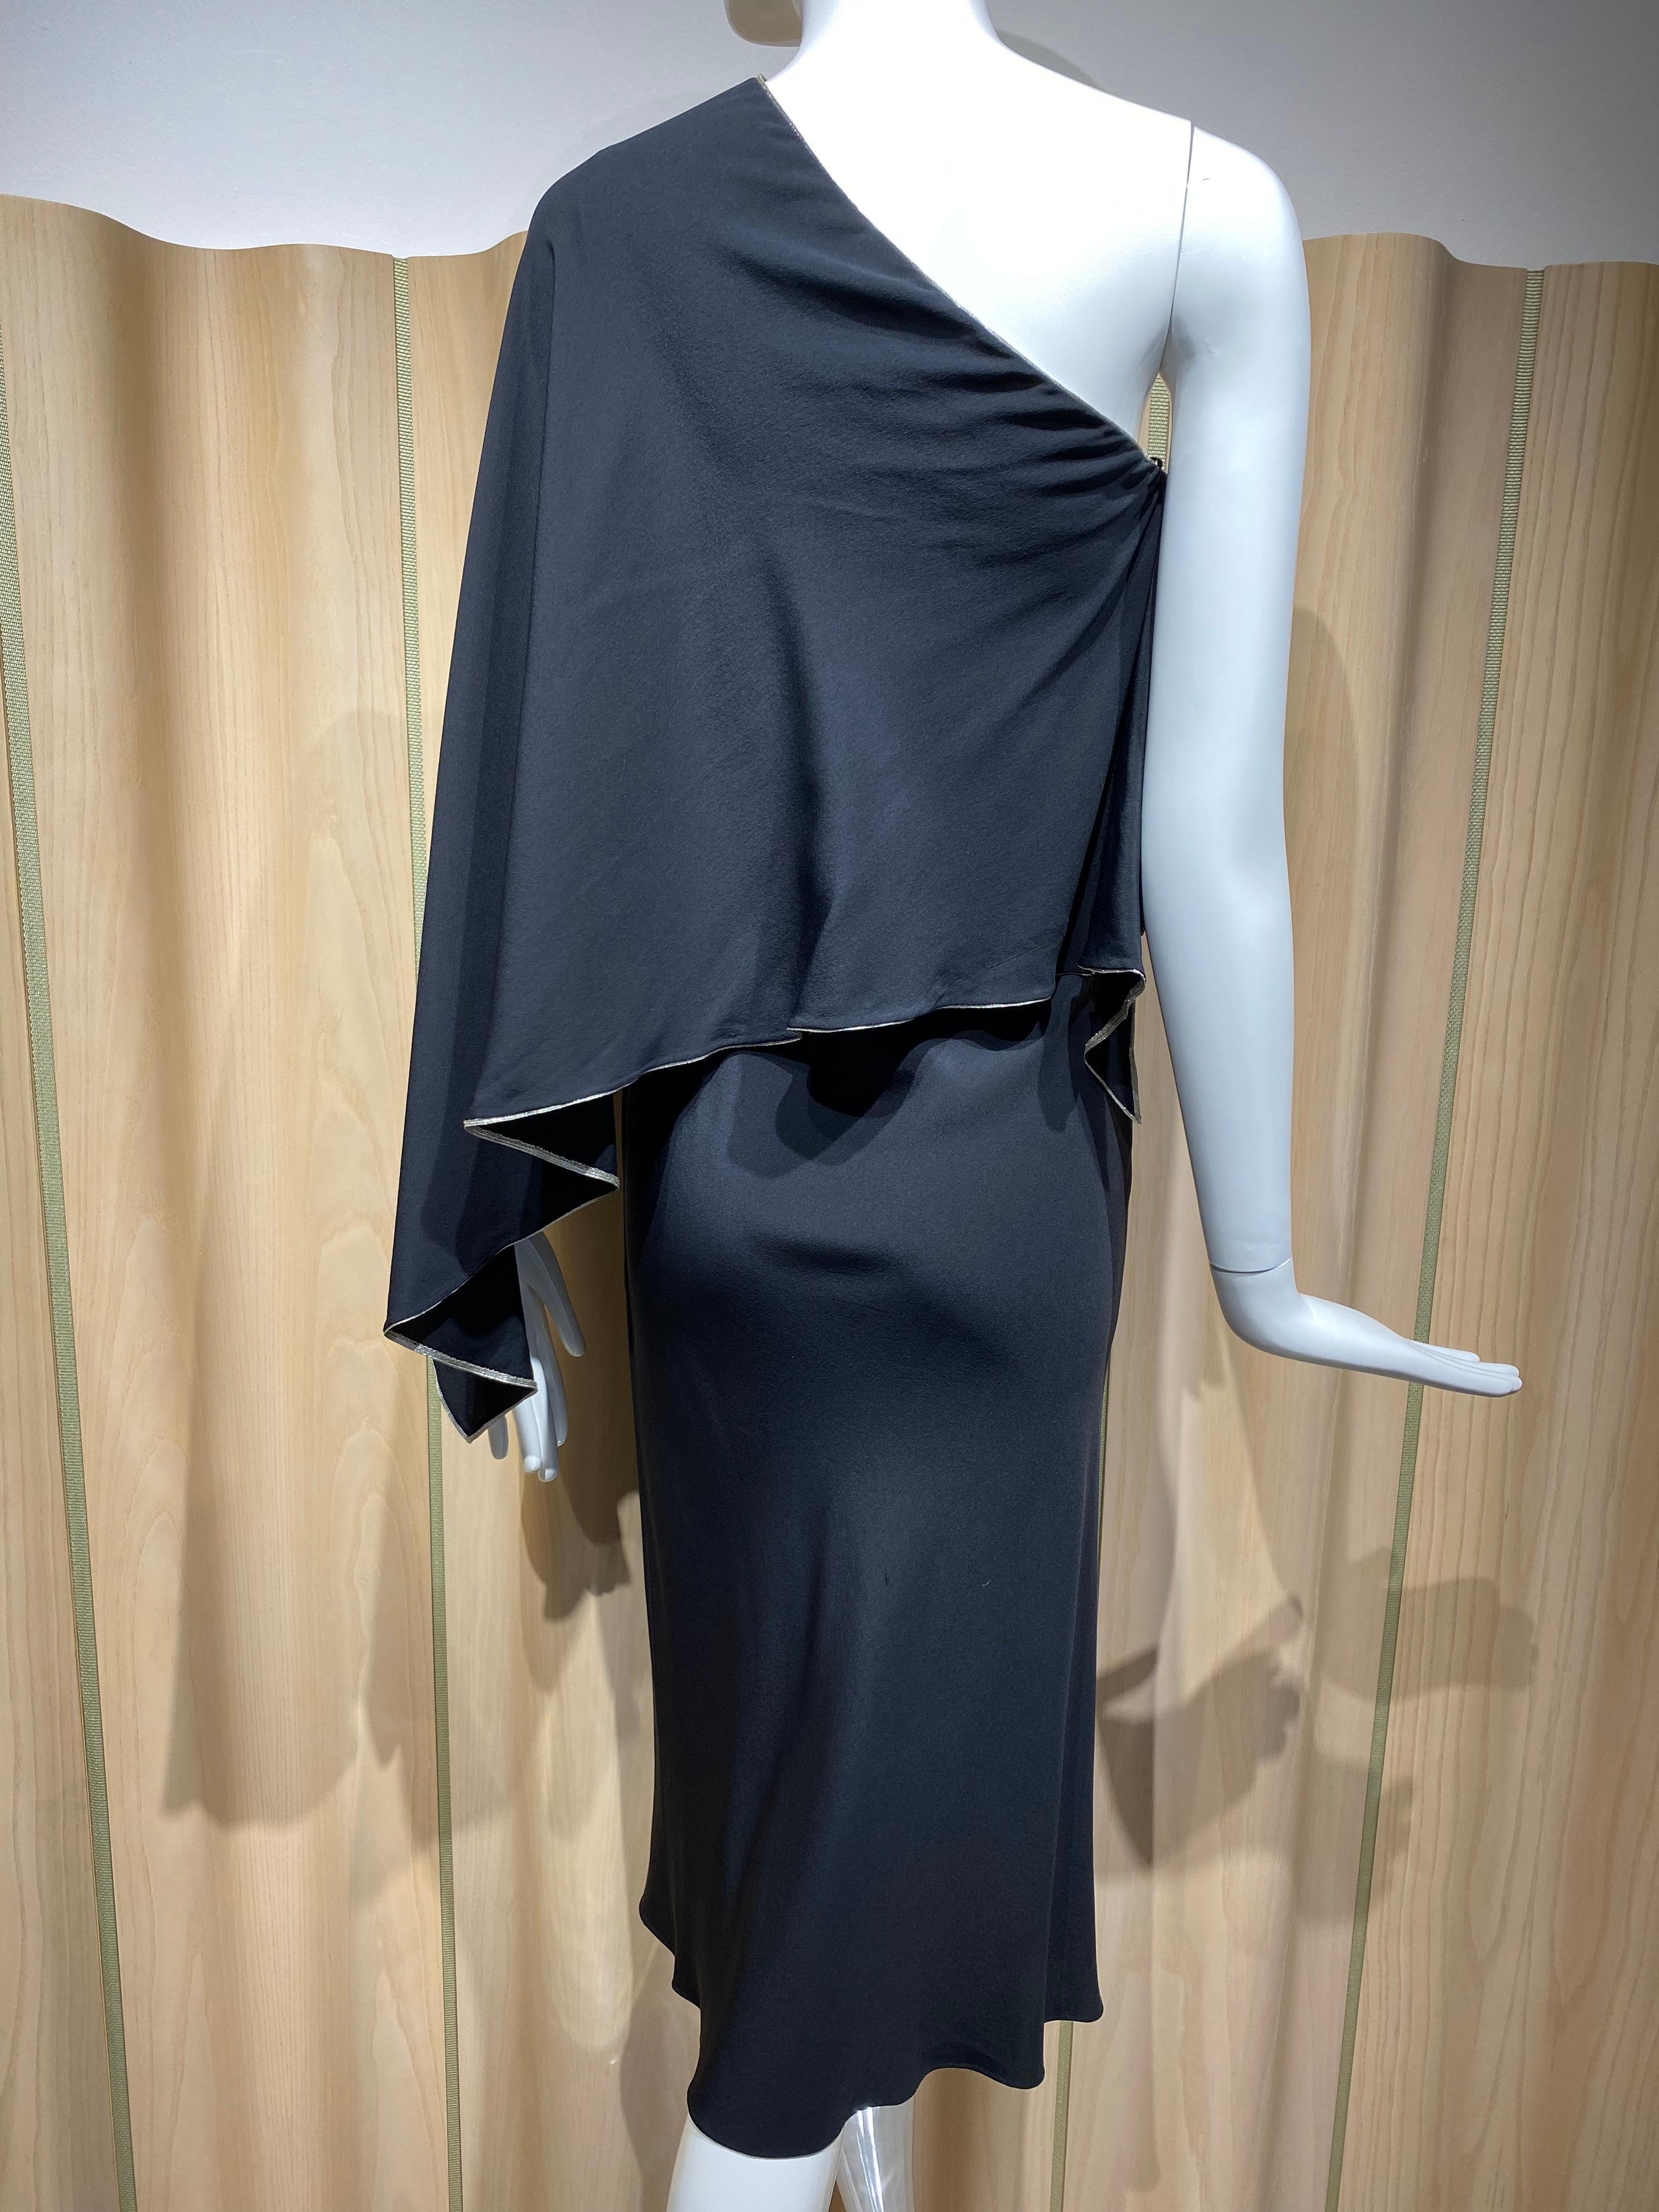 1970s Bill Blass one shoulder black crepe dress.
Size: 4/6 
Measurement: 35”/ Waist: 34” / Hip: 35” Dress length: 47”

**small tiny flaw on the skirt ( see image #6)